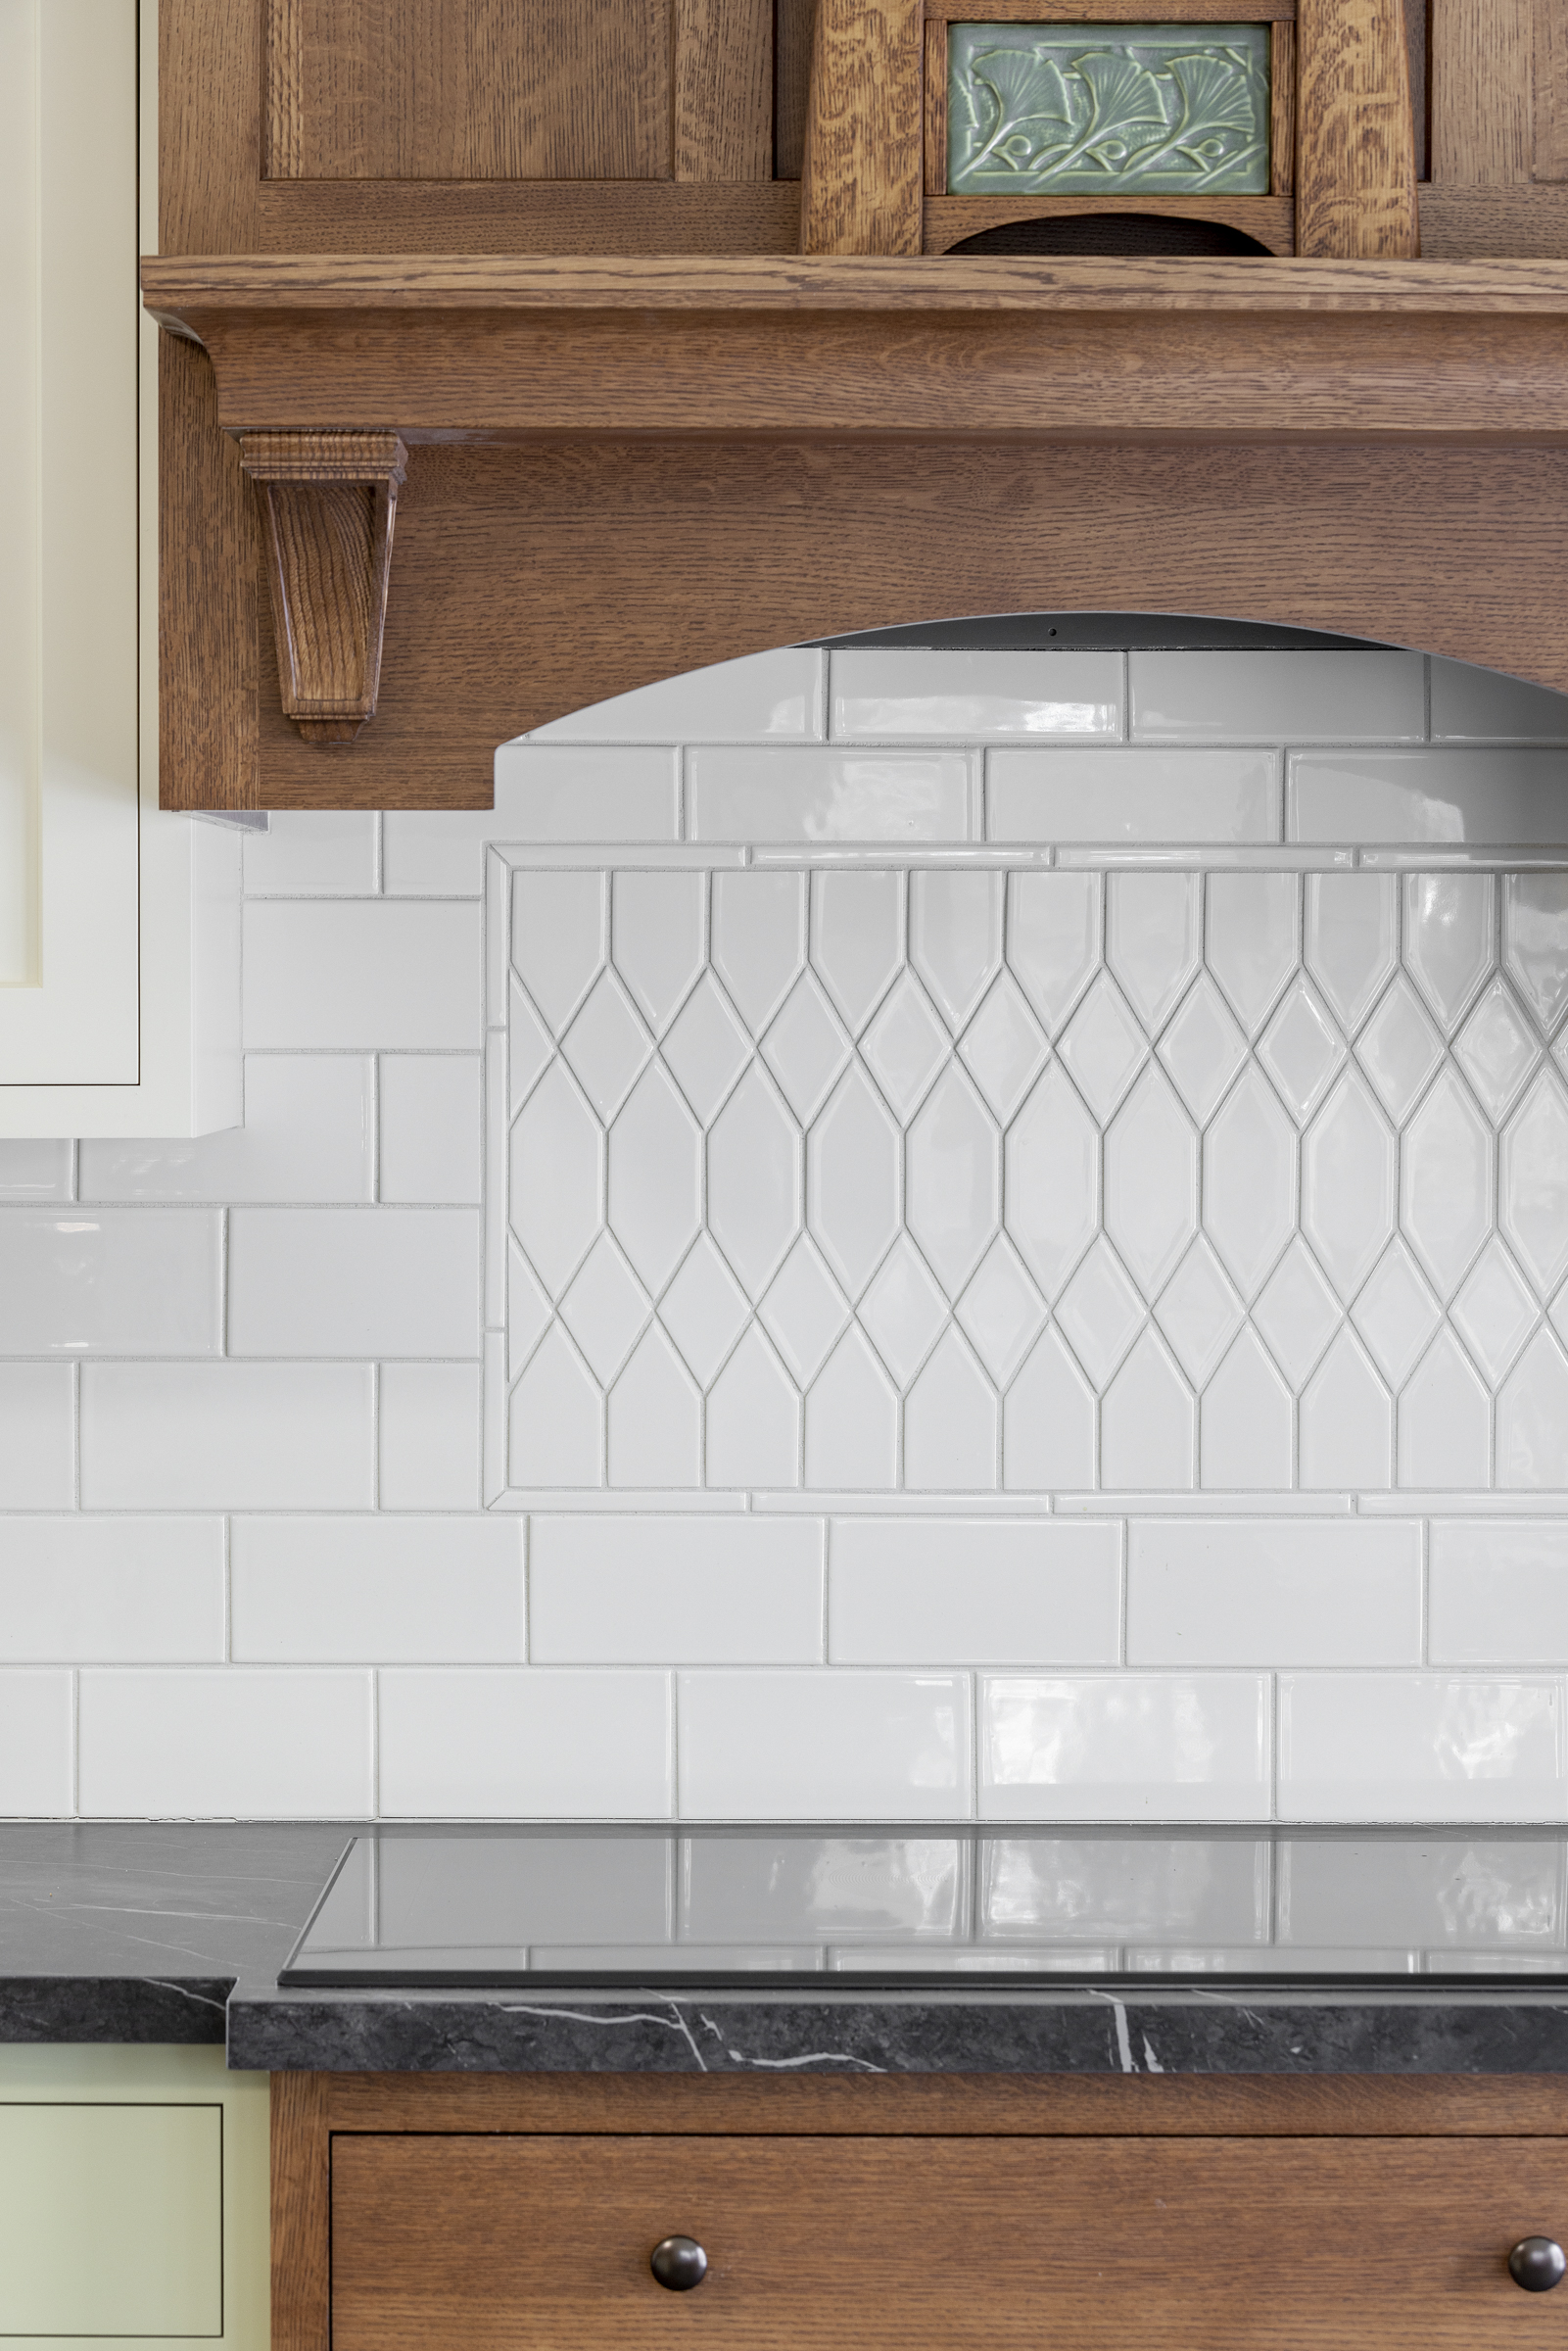 Kitchen remodel with white tile backsplash above stove top with custom wooden hood vent